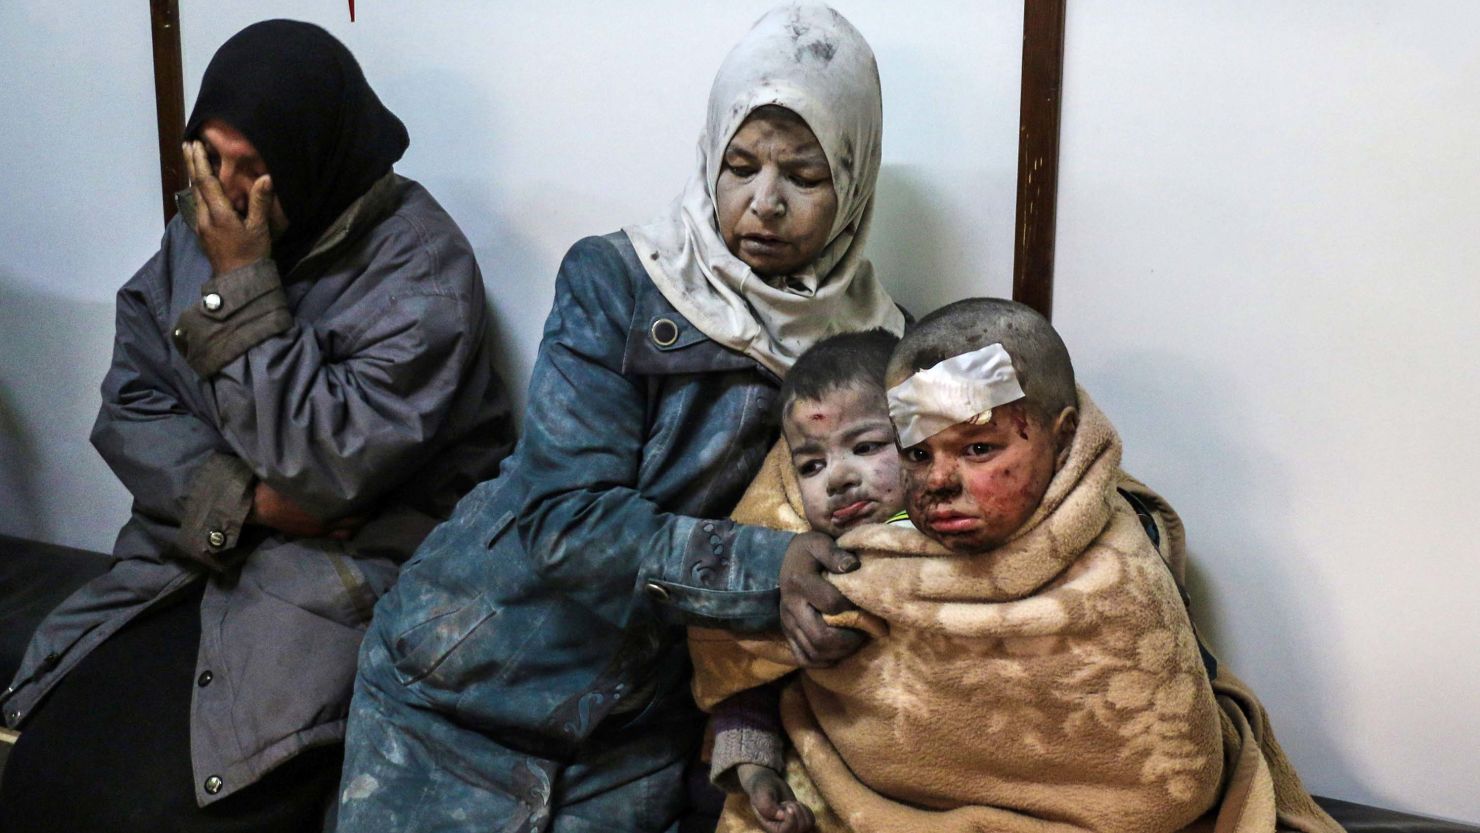 Injured children and women wait at a hospital following a reported strike by Syrian government forces near Damascus, on February 20.